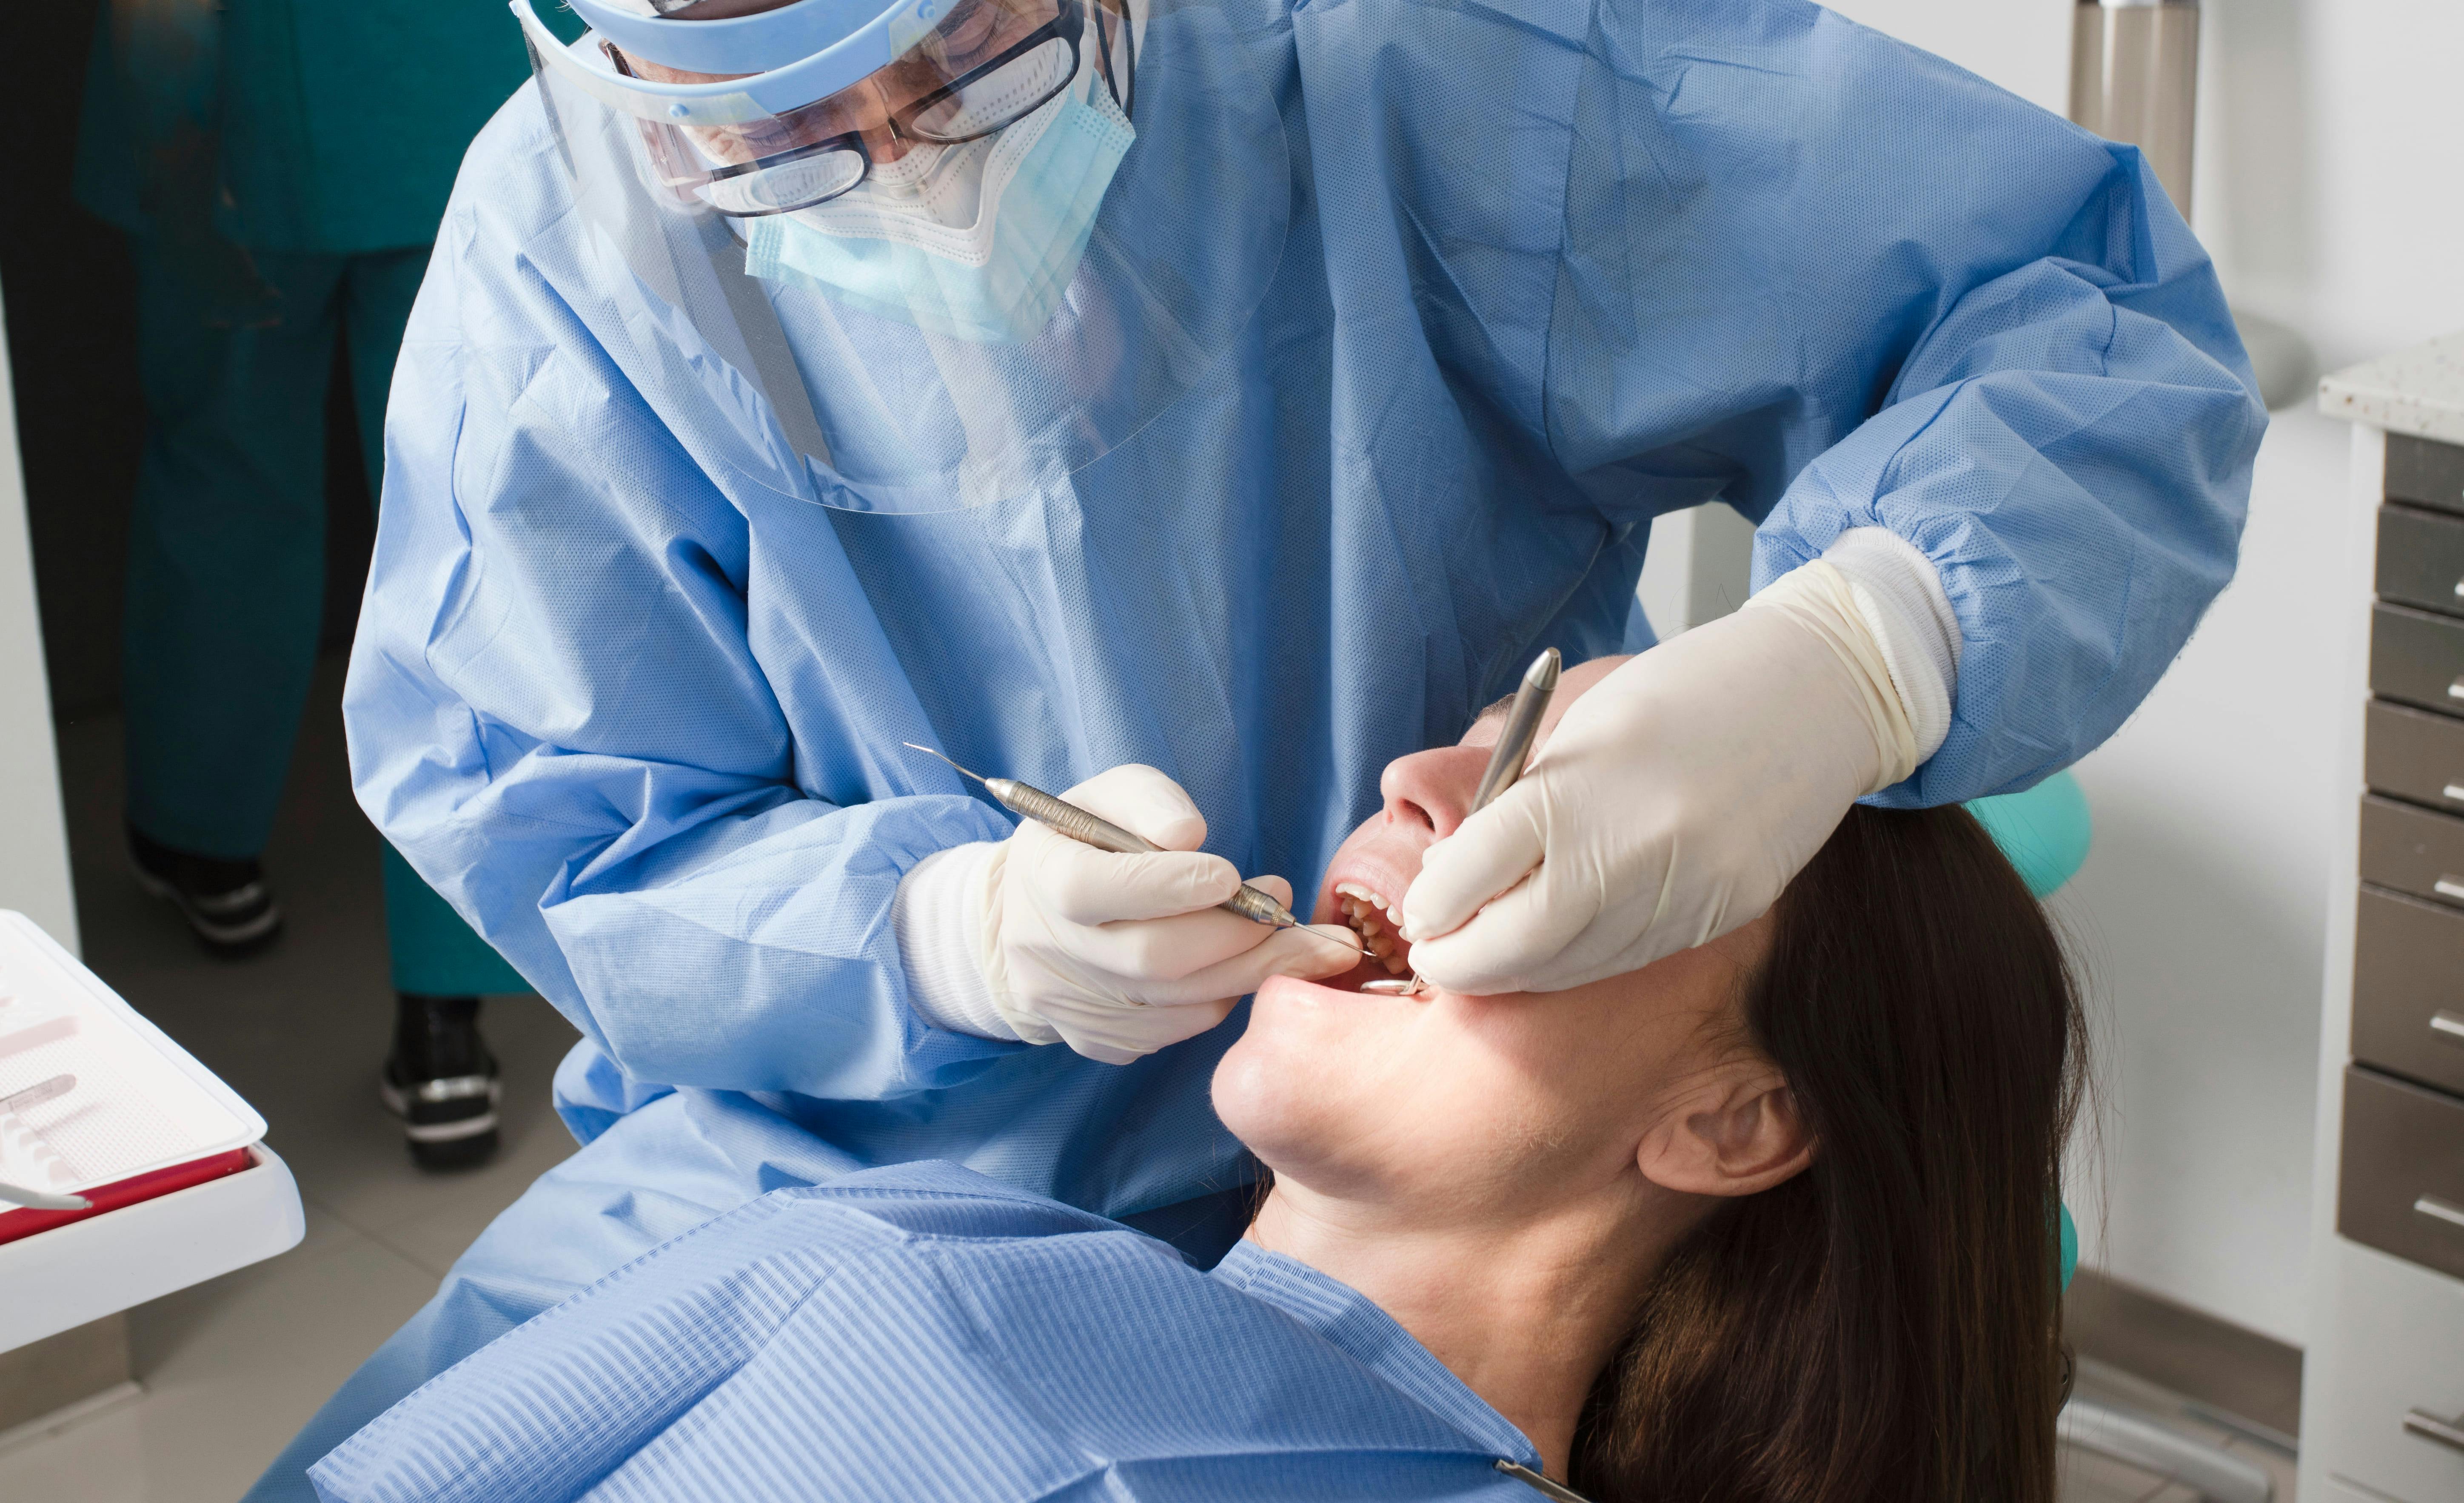 A dentist wearing a mask and face shield works on the teeth of a patient with long hair.